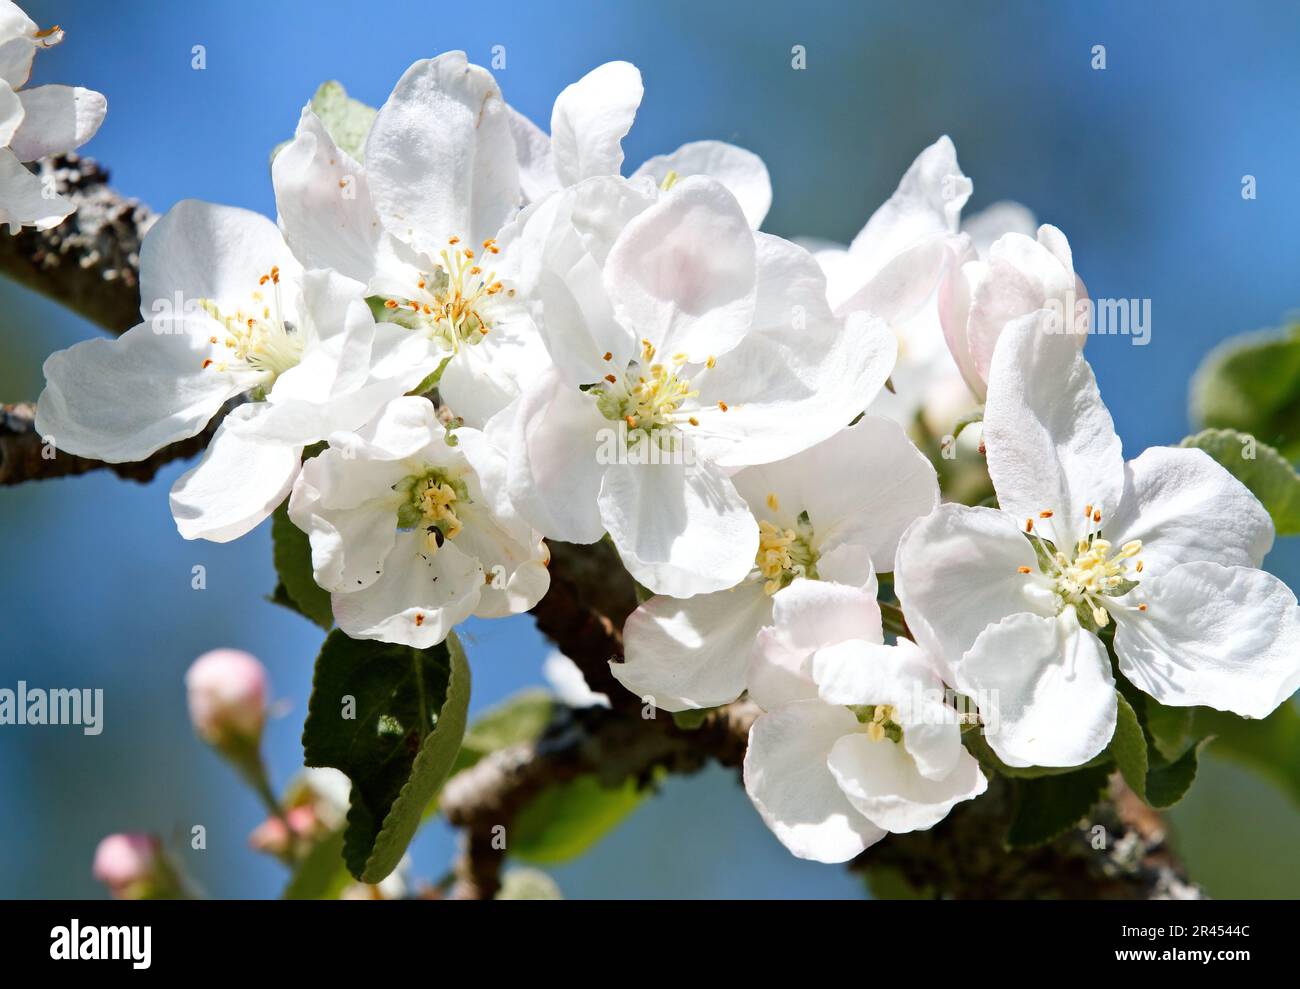 Apple tree blooming with bright white flowers in spring Stock Photo